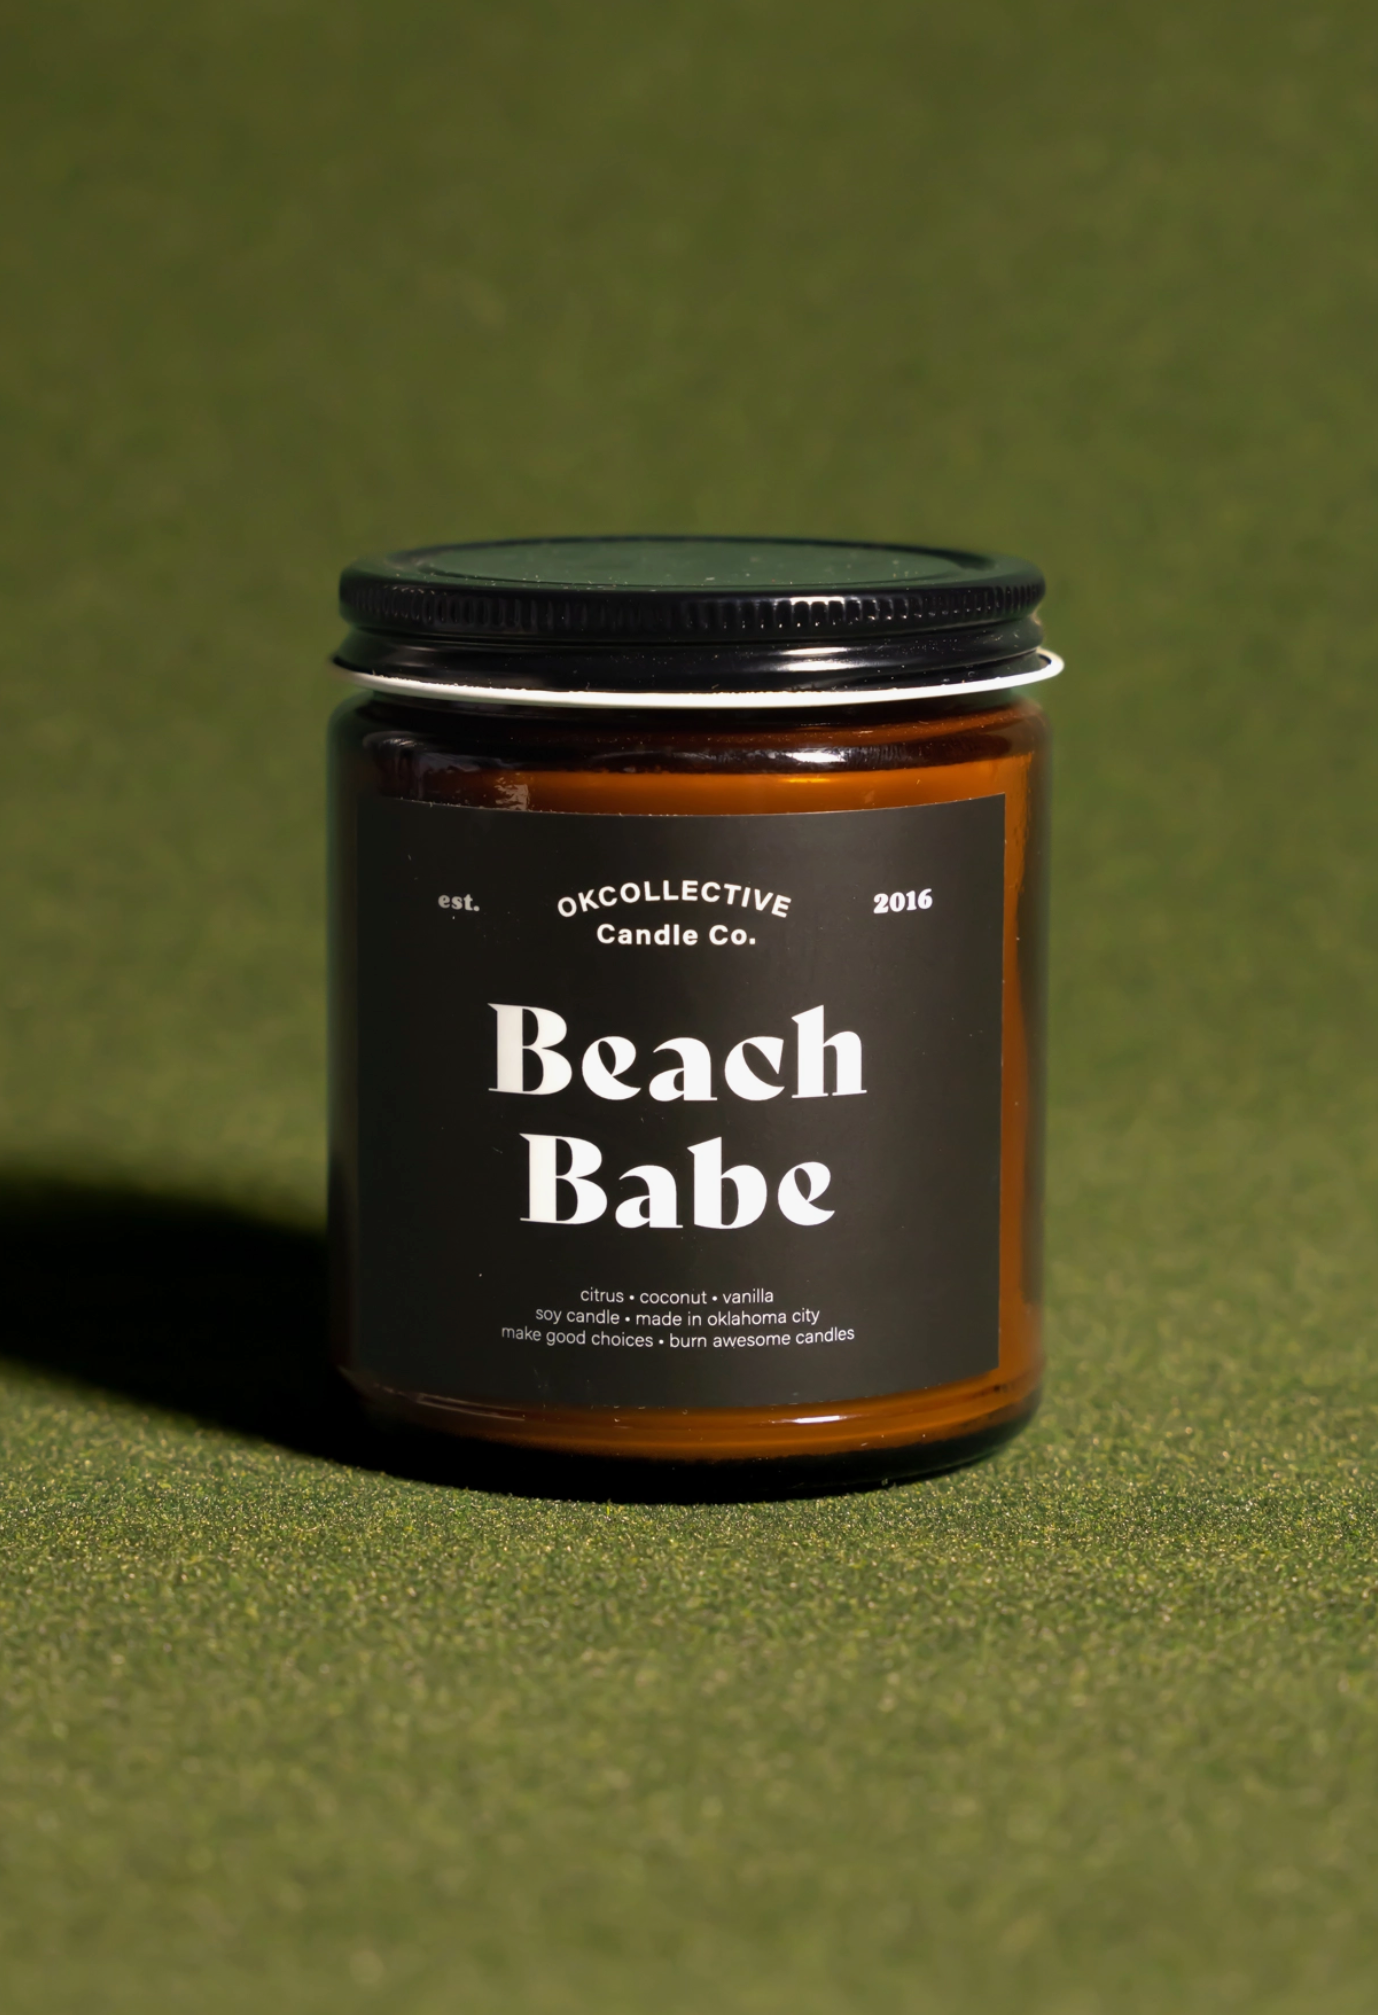 Beach Babe Pure Soy Candle by OKCollective Sold by Le Monkey House